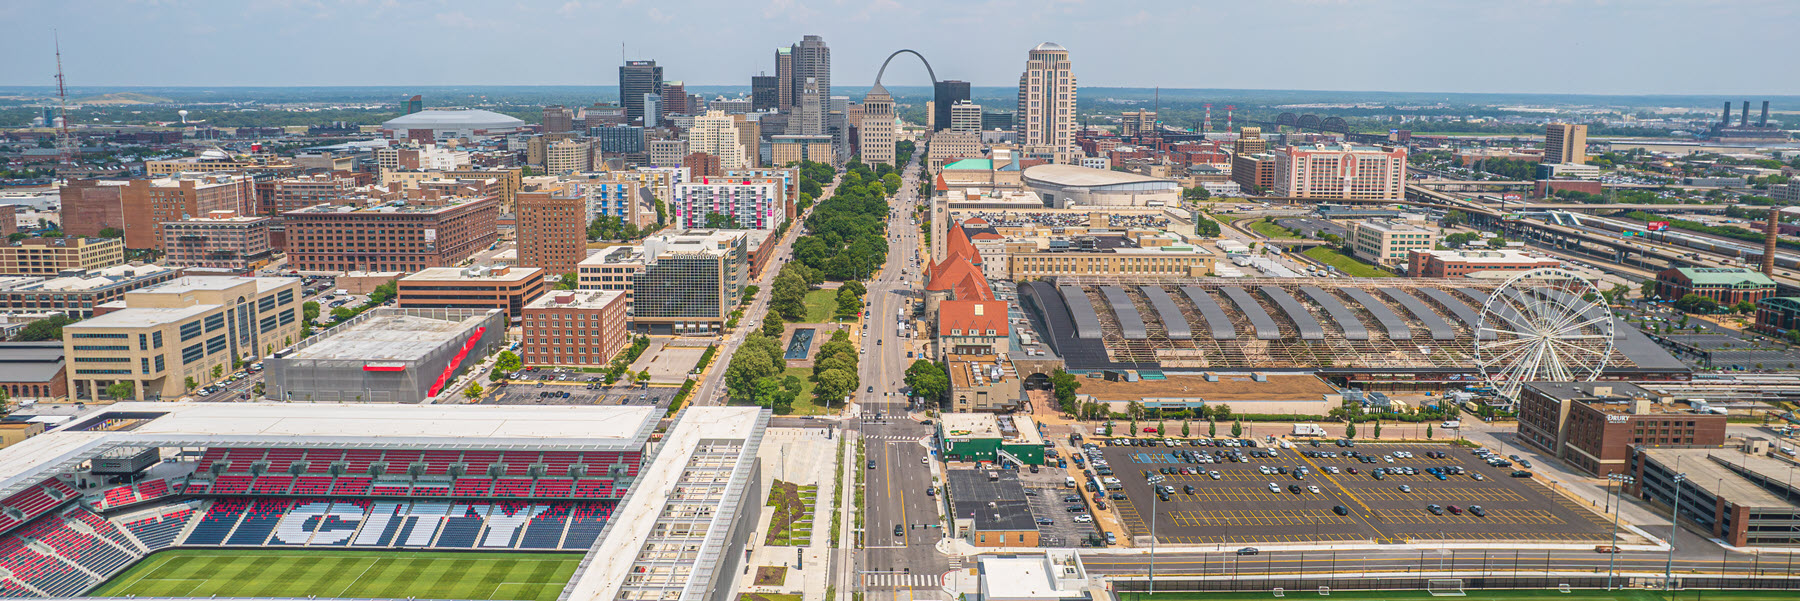 An aerial view of downtown St. Louis.